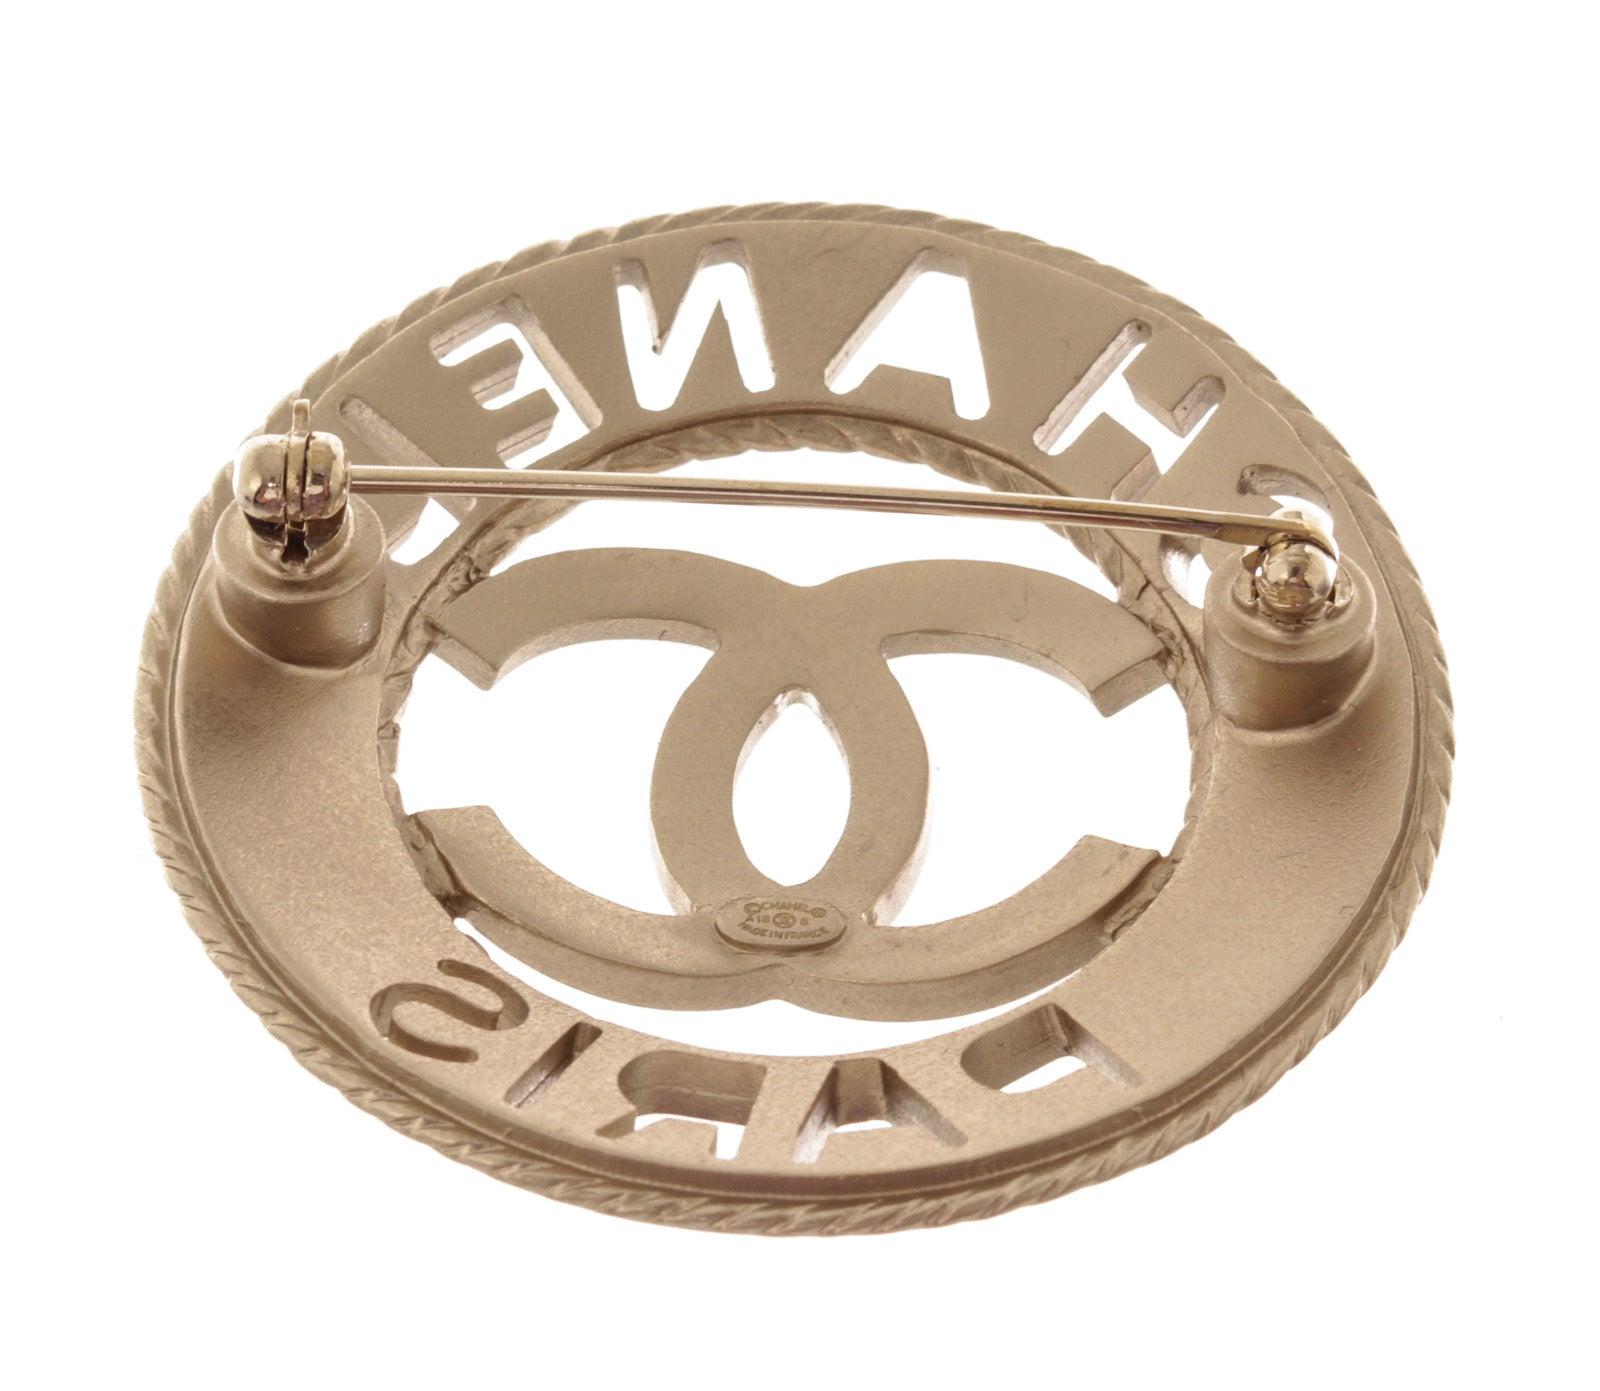 Chanel Silver-tone Metal CC Paris Round Brooch features interlocking CC logo at the center and silver-tone hardware.

54074MSC